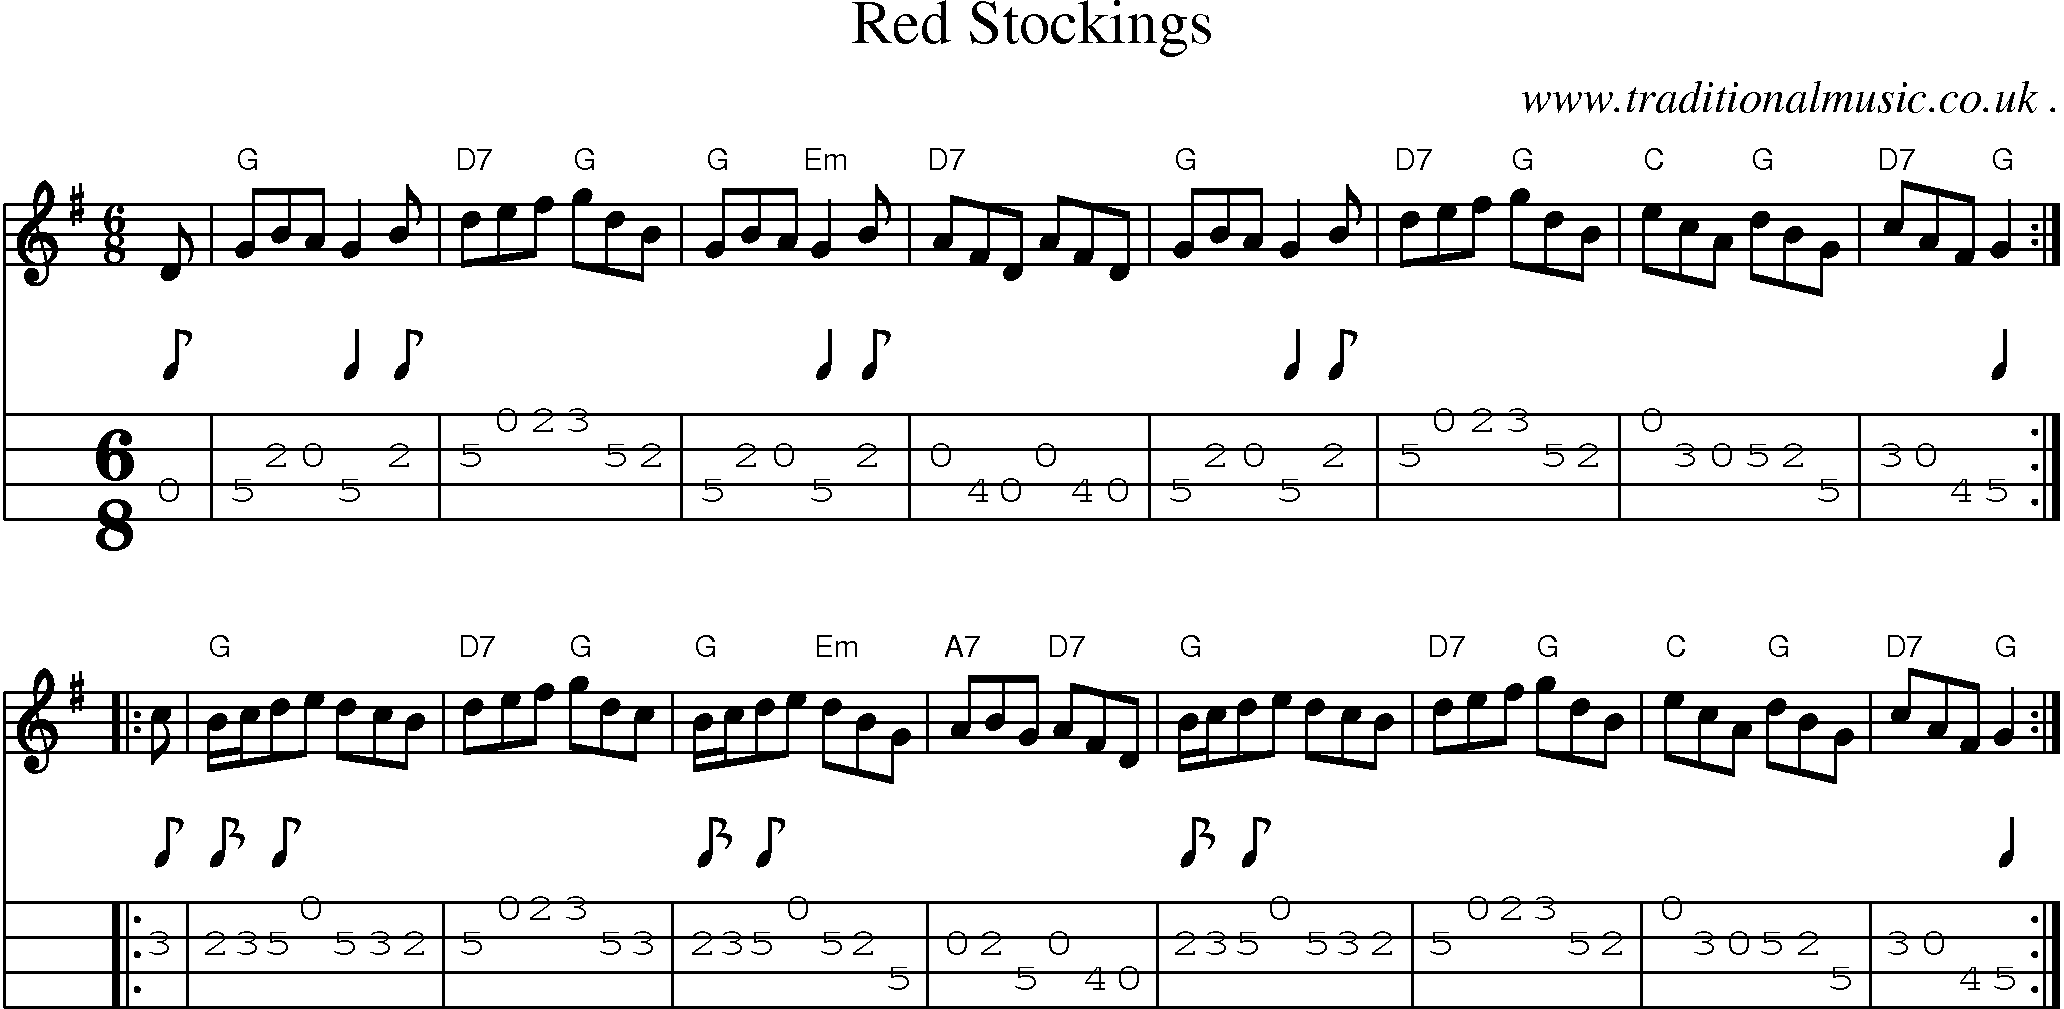 Sheet-music  score, Chords and Mandolin Tabs for Red Stockings